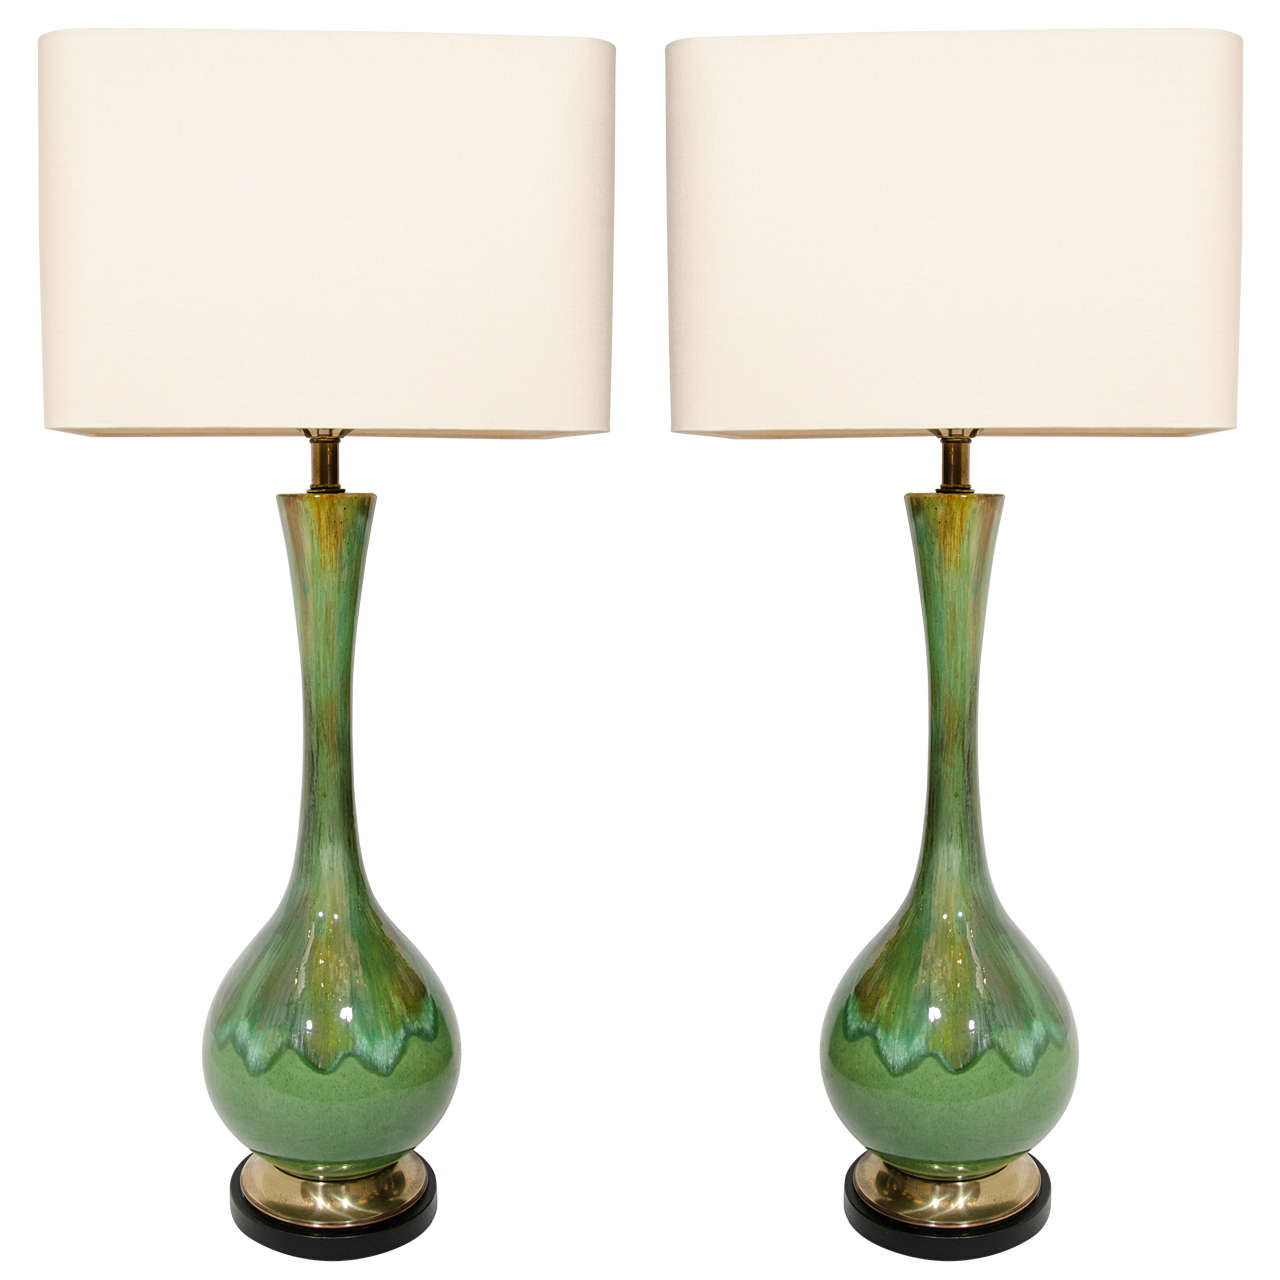 Pair of Modern Ceramic Moss Drip Glazed Lamps with Long Neck Design